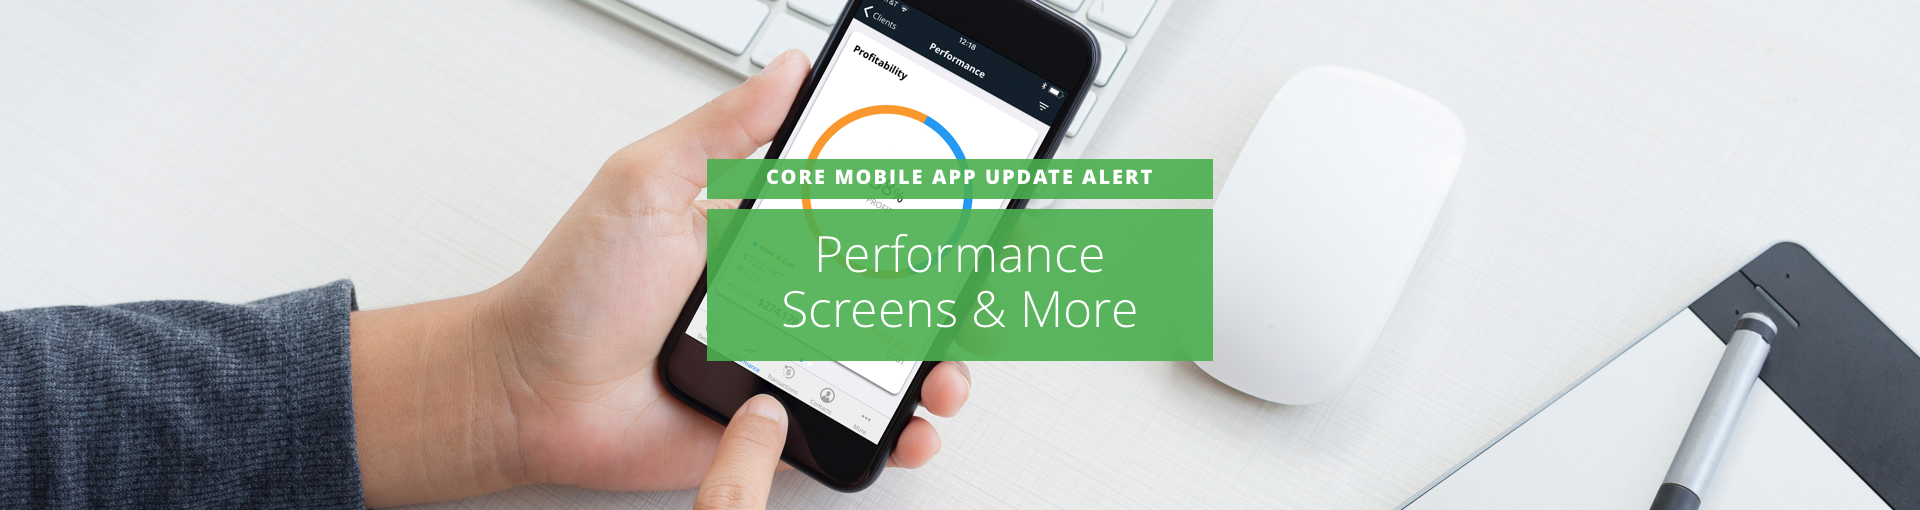 CORE Mobile App Update: Performance Screens & More Featured Image